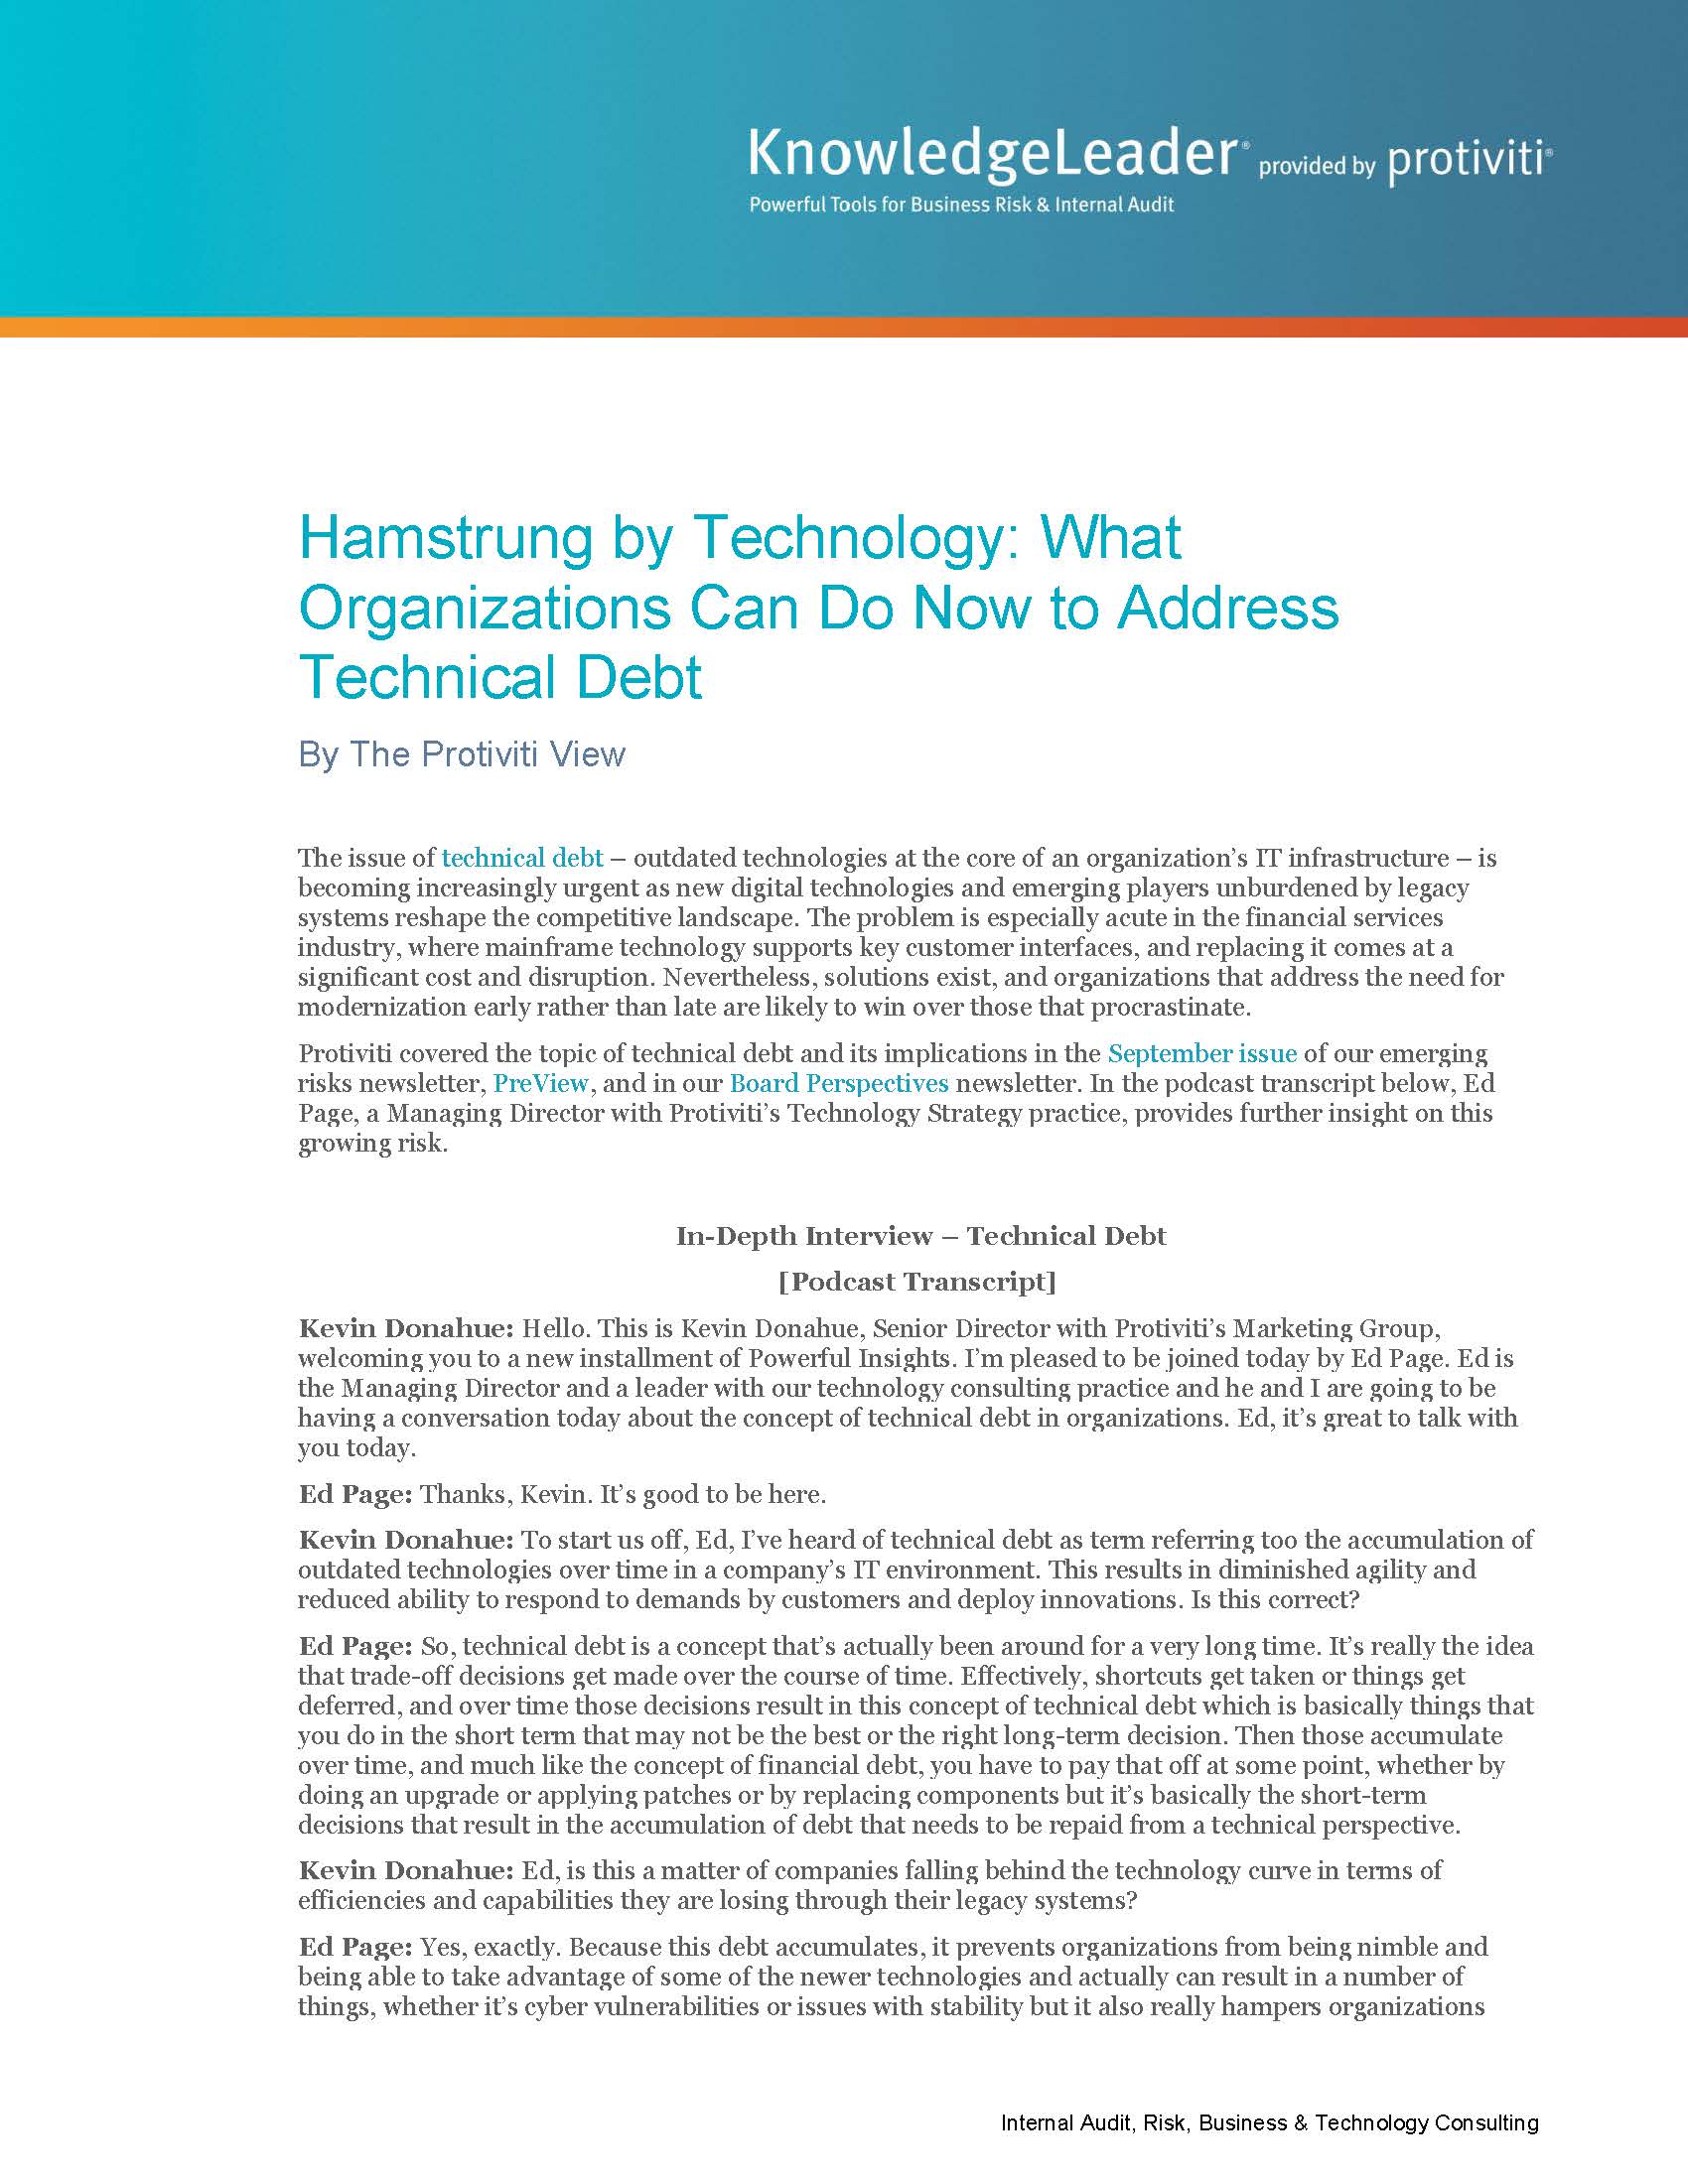 Screenshot of the first page of Hamstrung by Technology What Organizations Can Do Now to Address Technical Debt